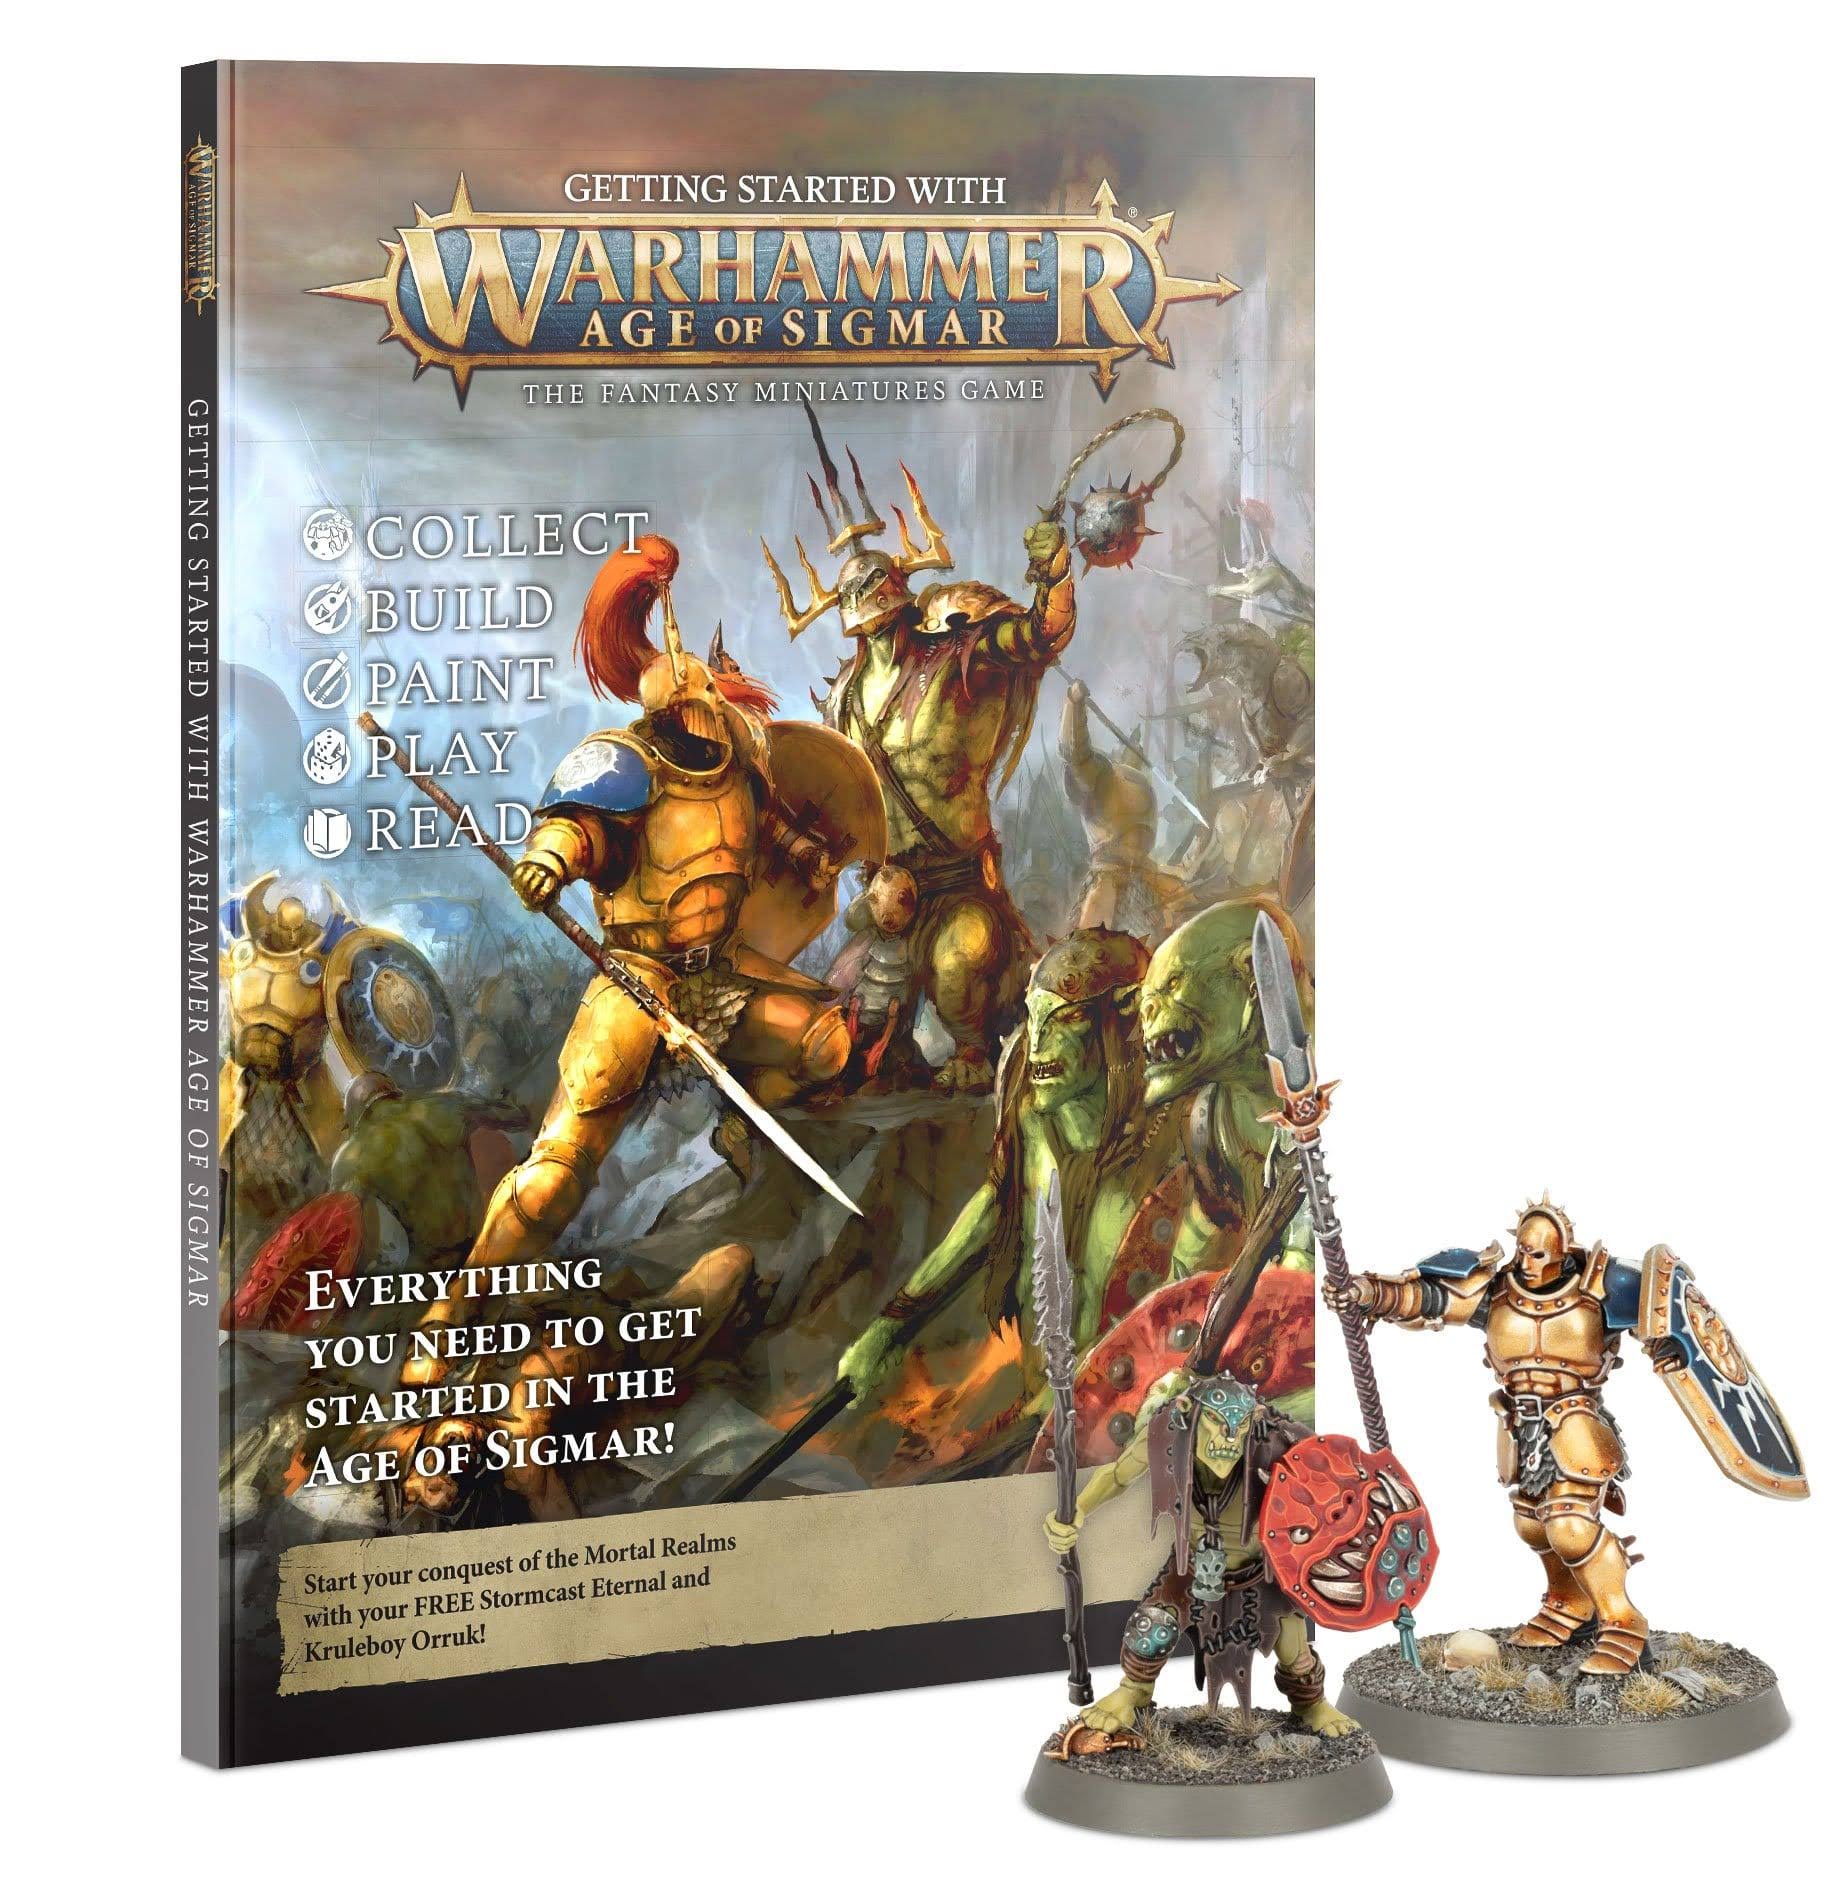 Getting Started with Warhammer Age of Sigmar: The Fantasy Miniatures Game [Book]